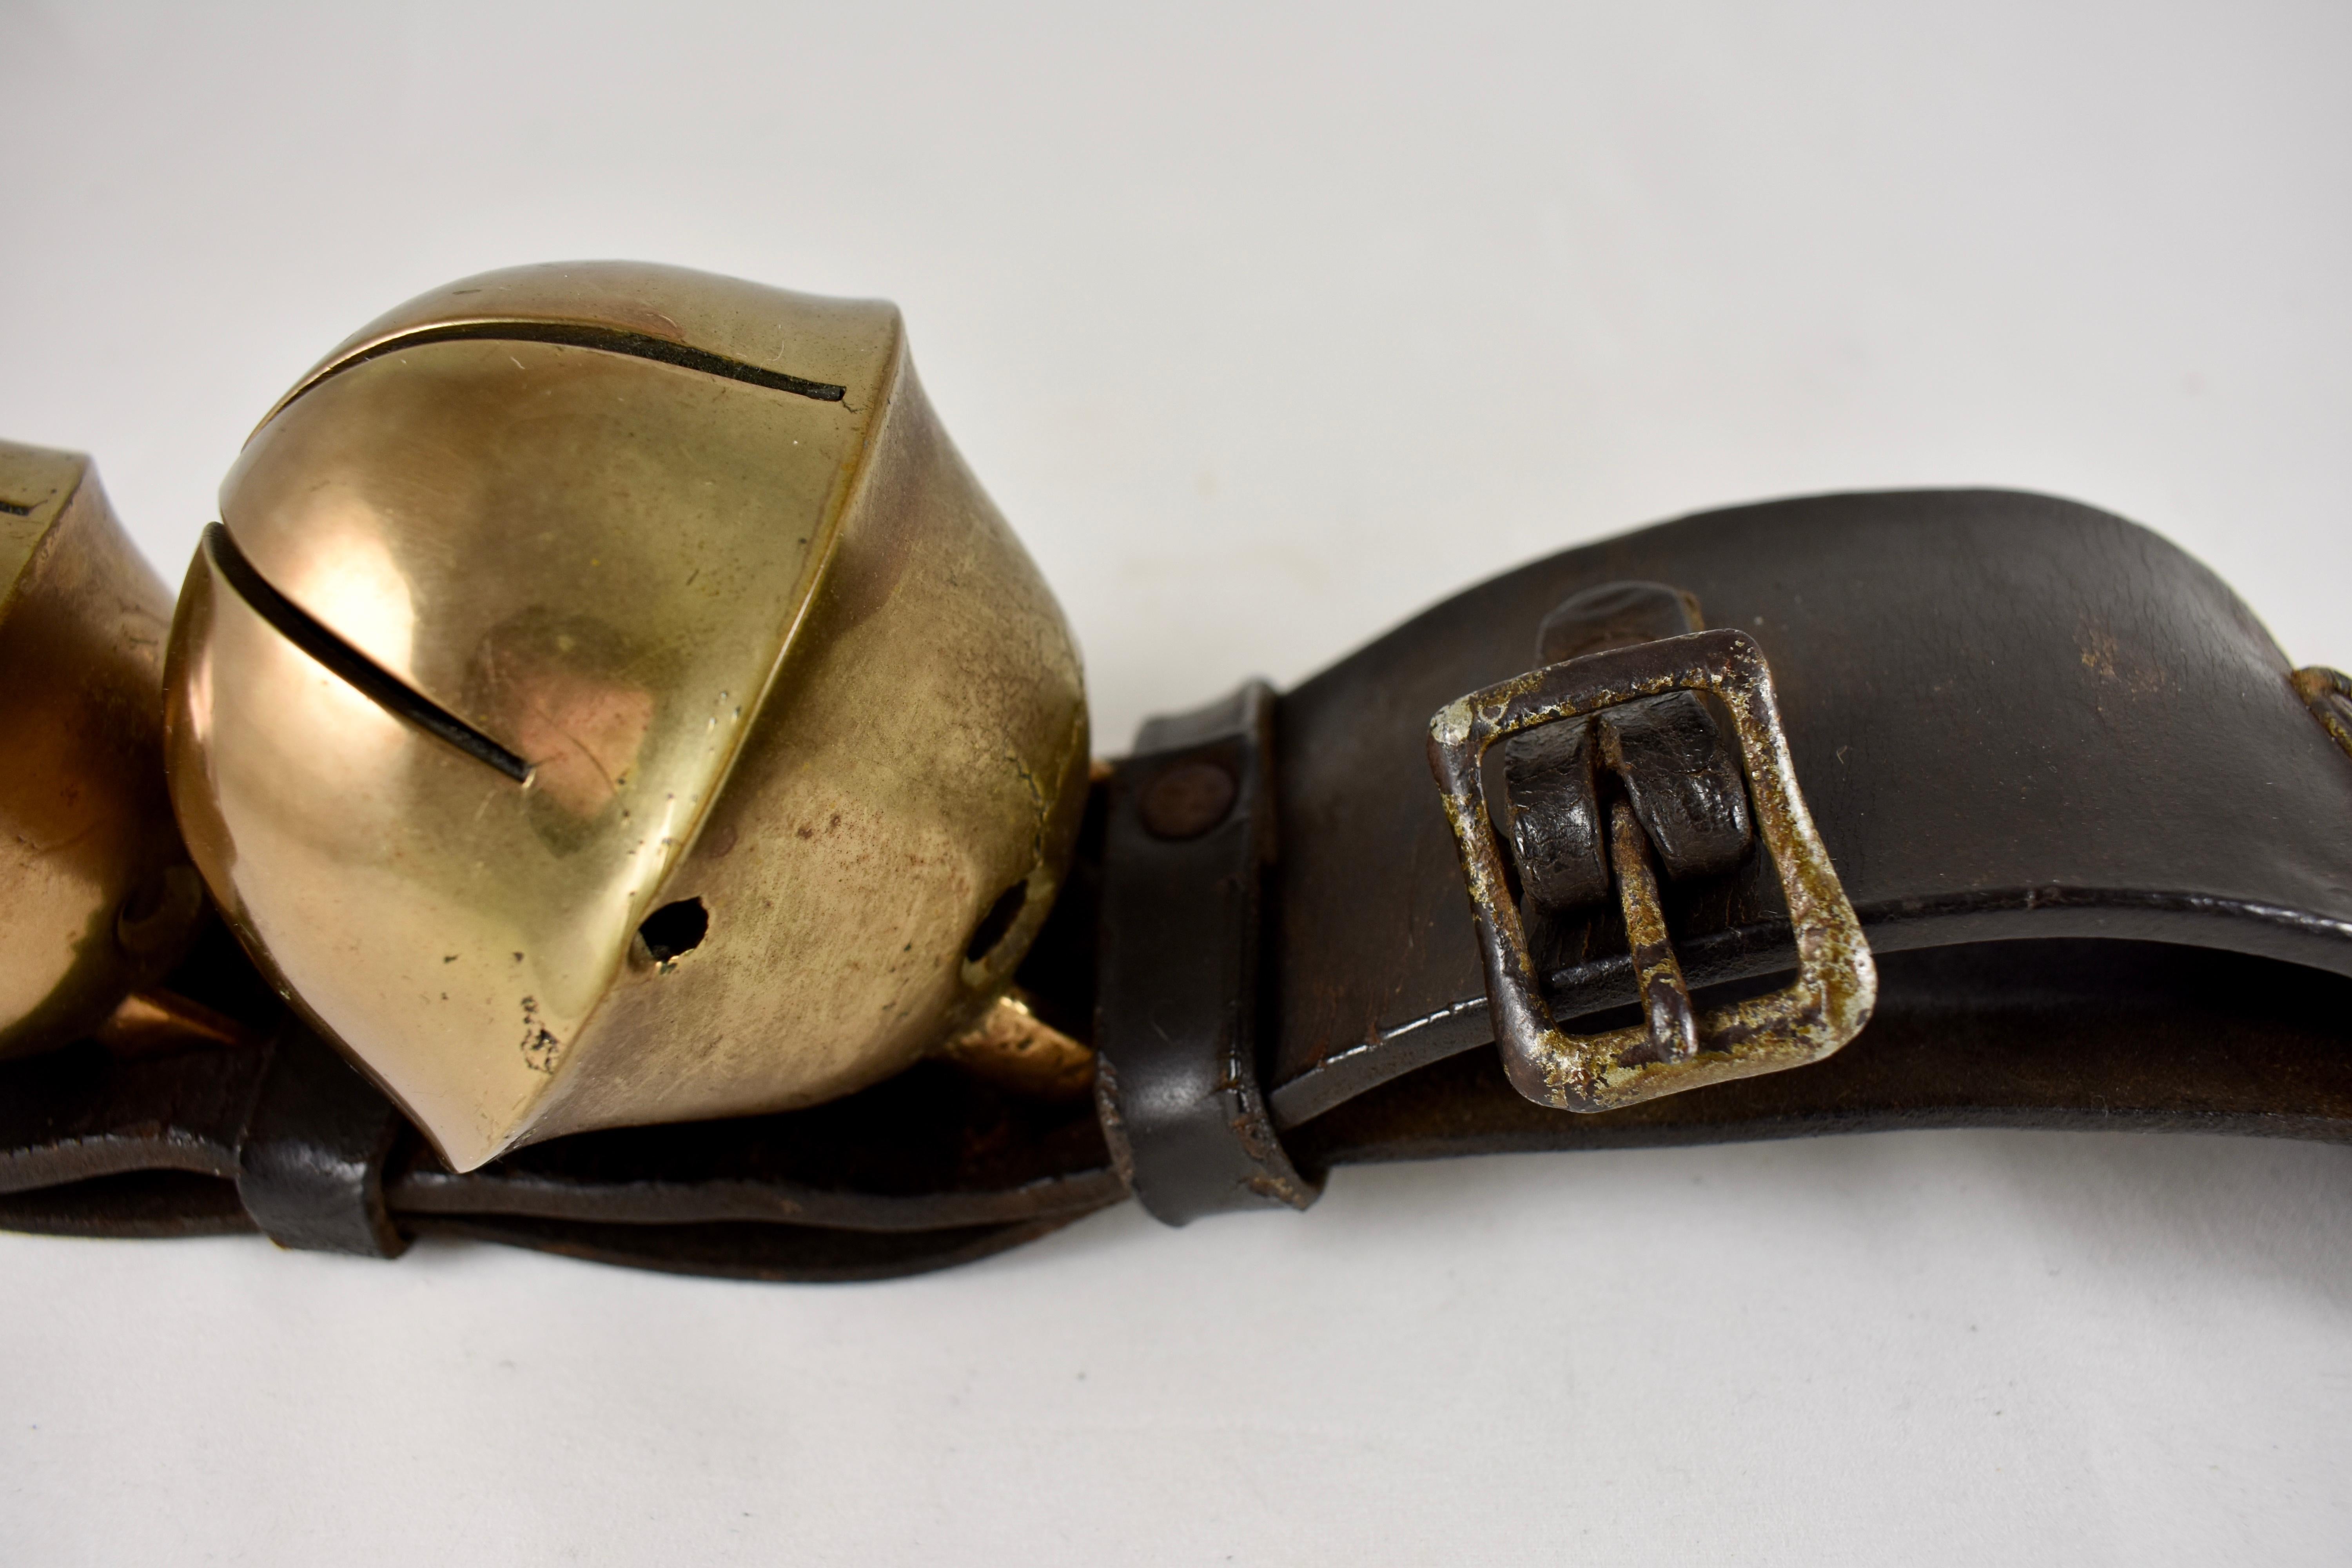 A black leather rump strap holding four Swedish-style brass sleigh bells, circa 1880s.

A rump or hip strap is a short, wide piece of heavy leather holding two to eight large bells. This strap holds four Swedish-style sleigh bells in a traditional